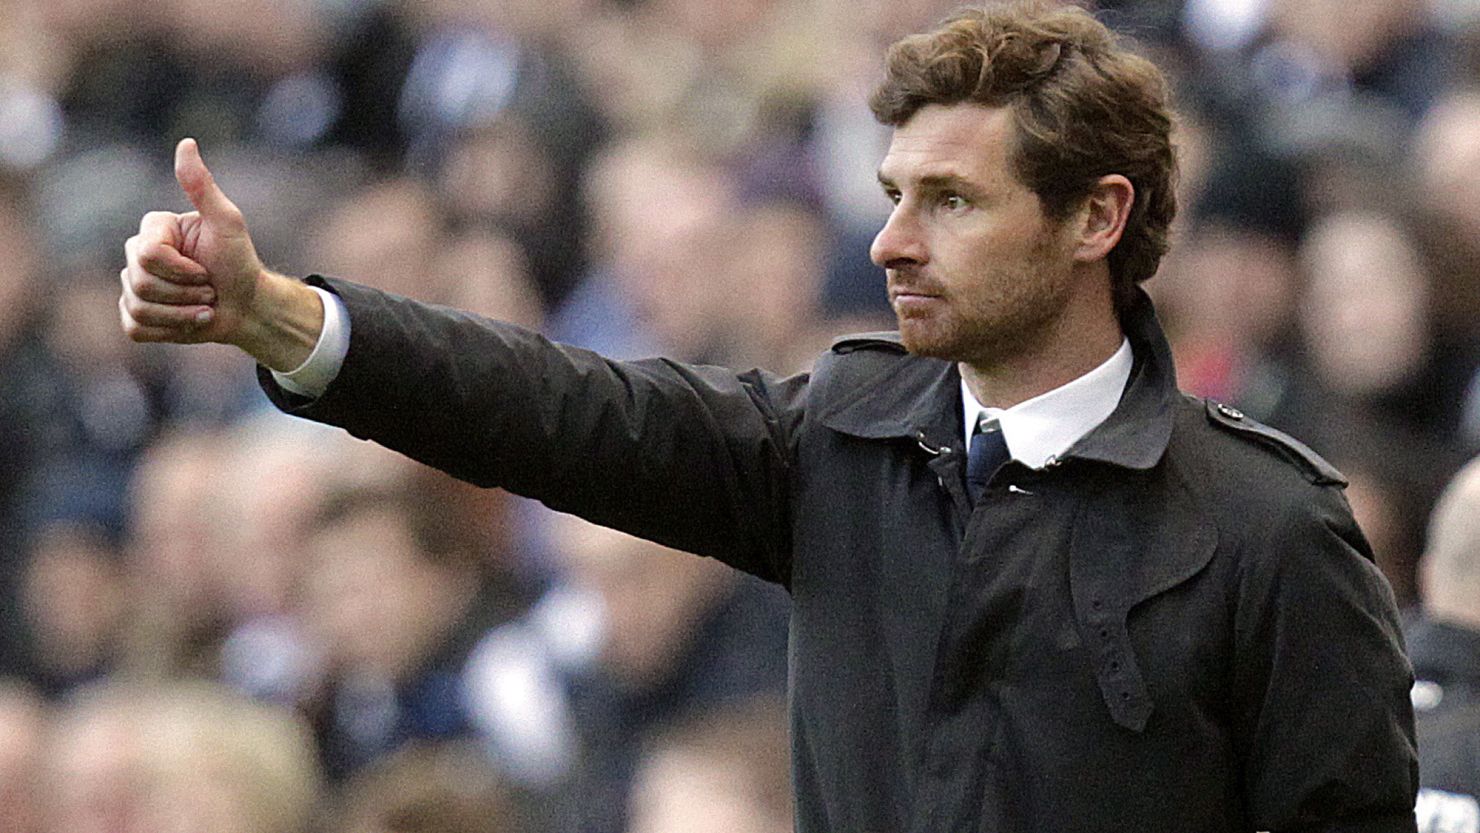 Andre Villas-Boas is back in the Premier League with Tottenham, three months after being sacked by Chelsea